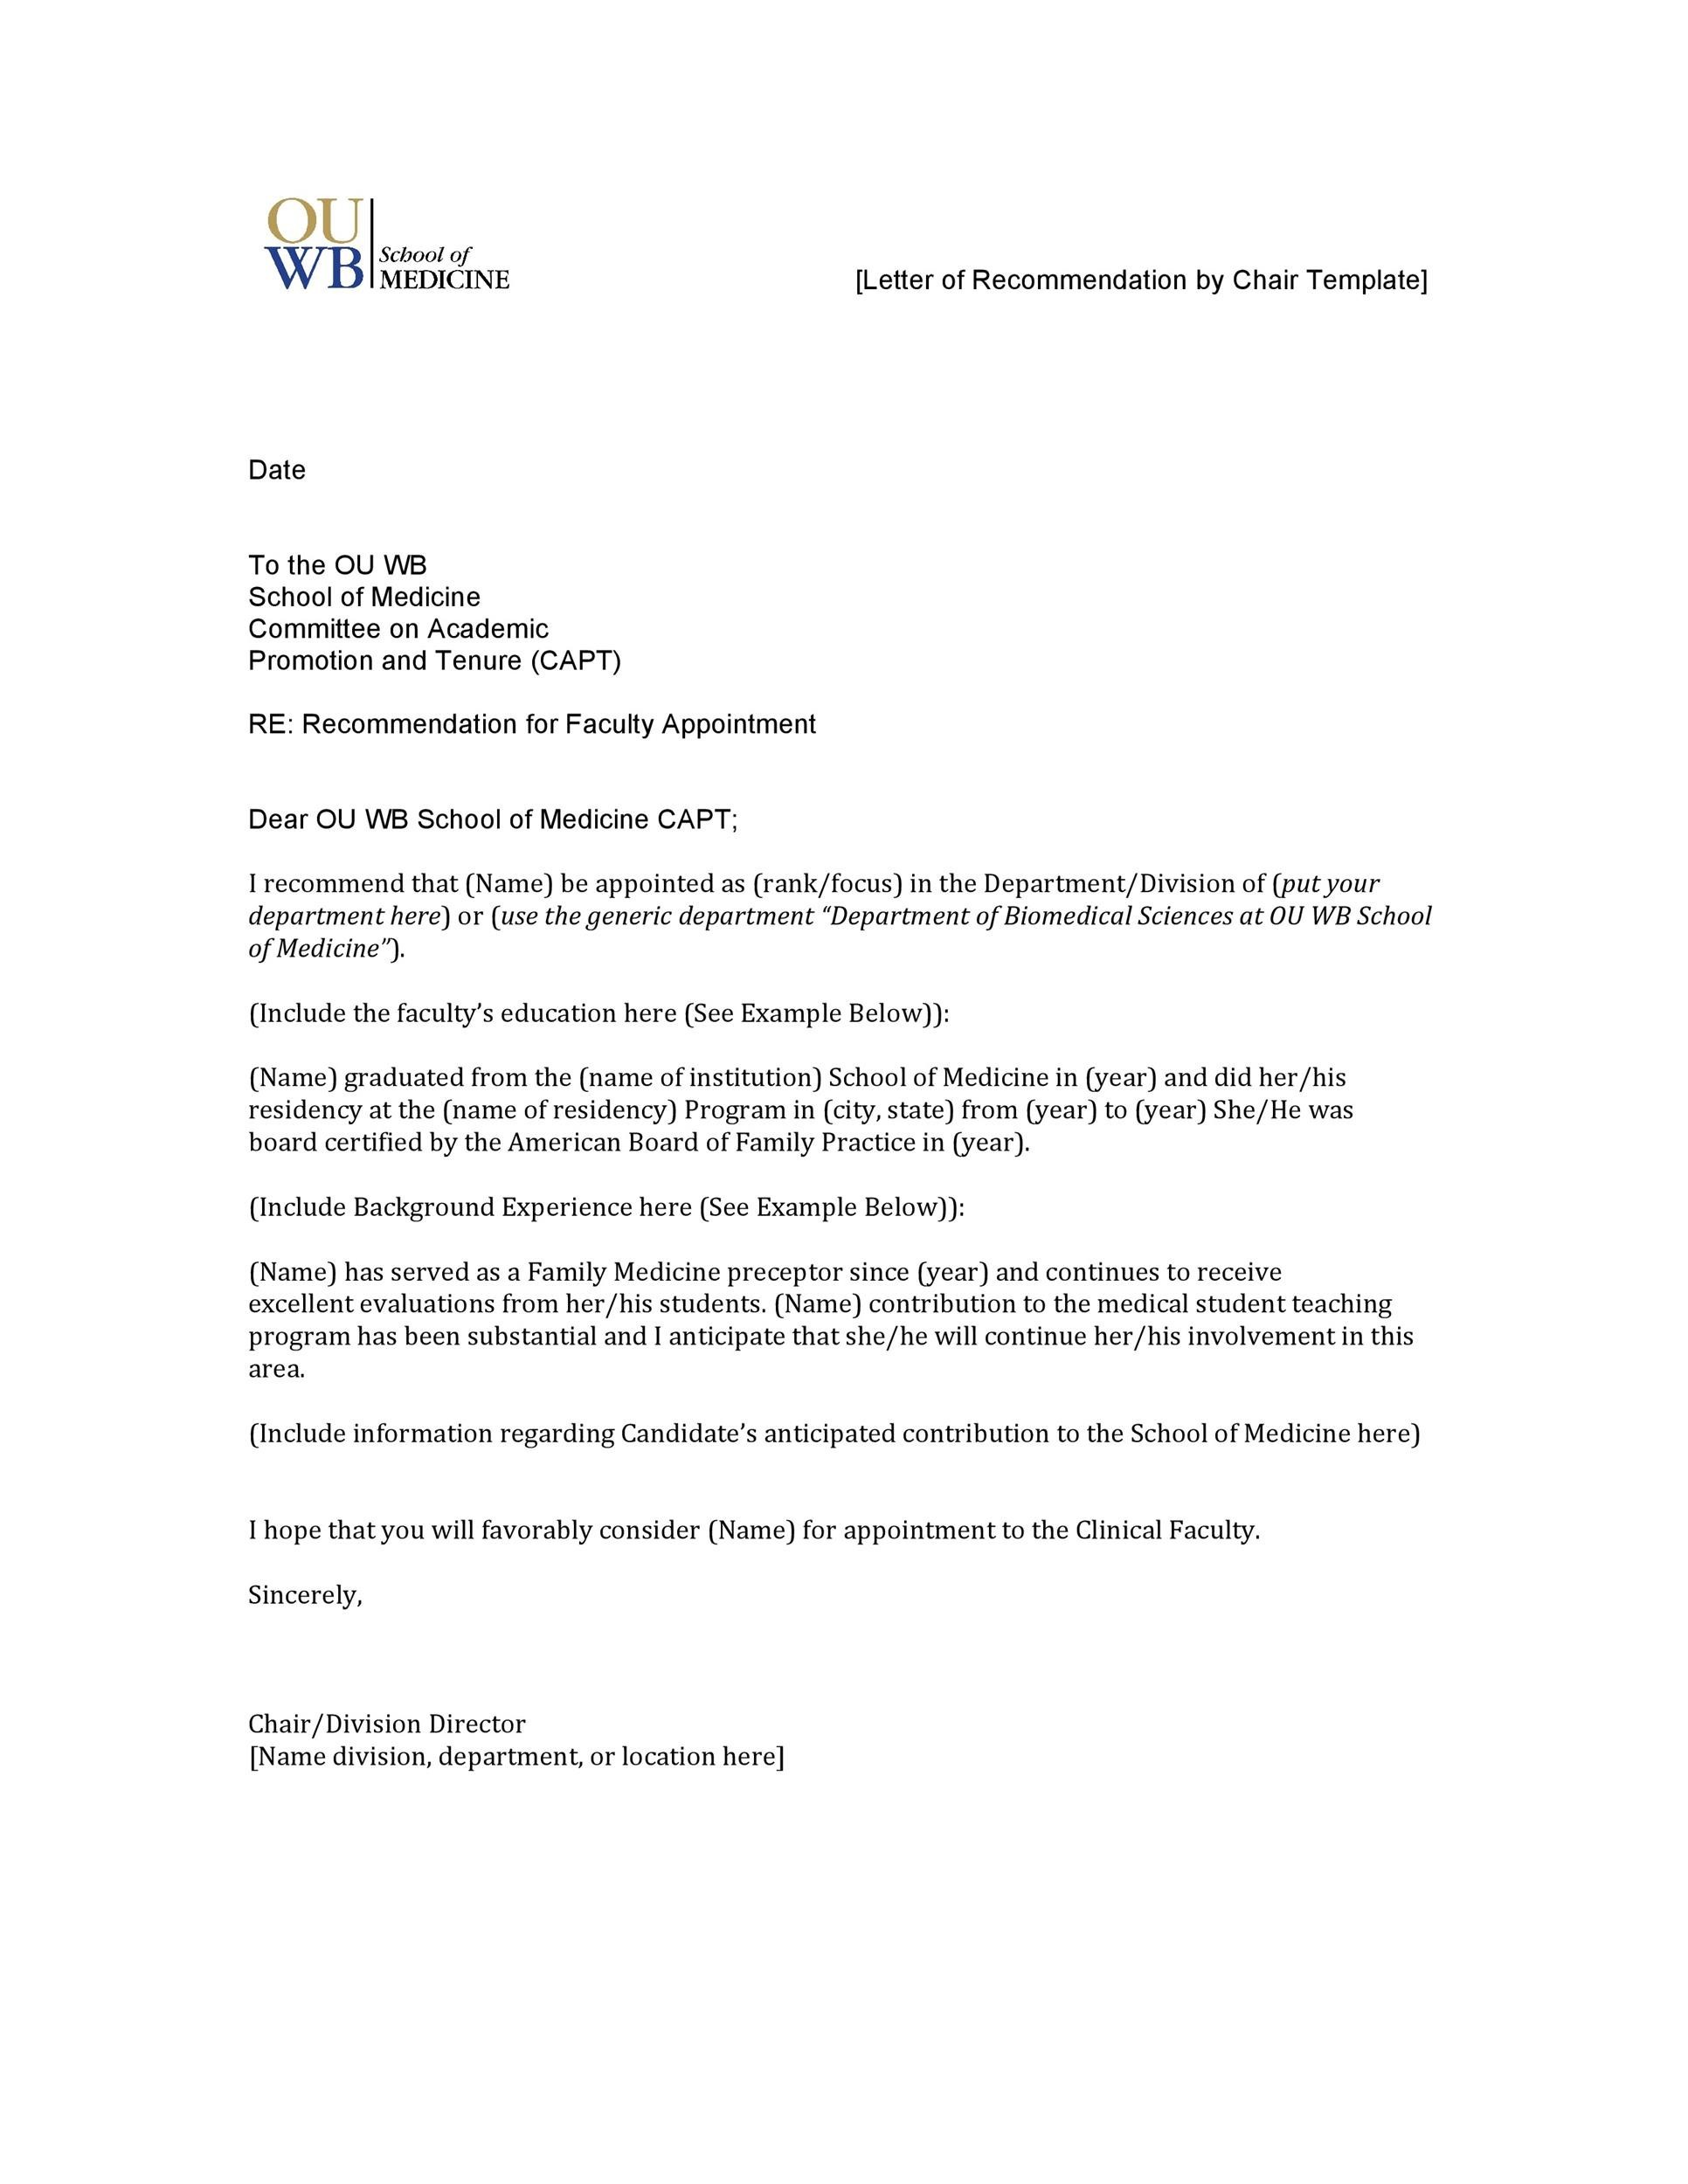 Emigrate or immigrate: Recommendation letter Inside Letter Of Reccomendation Template